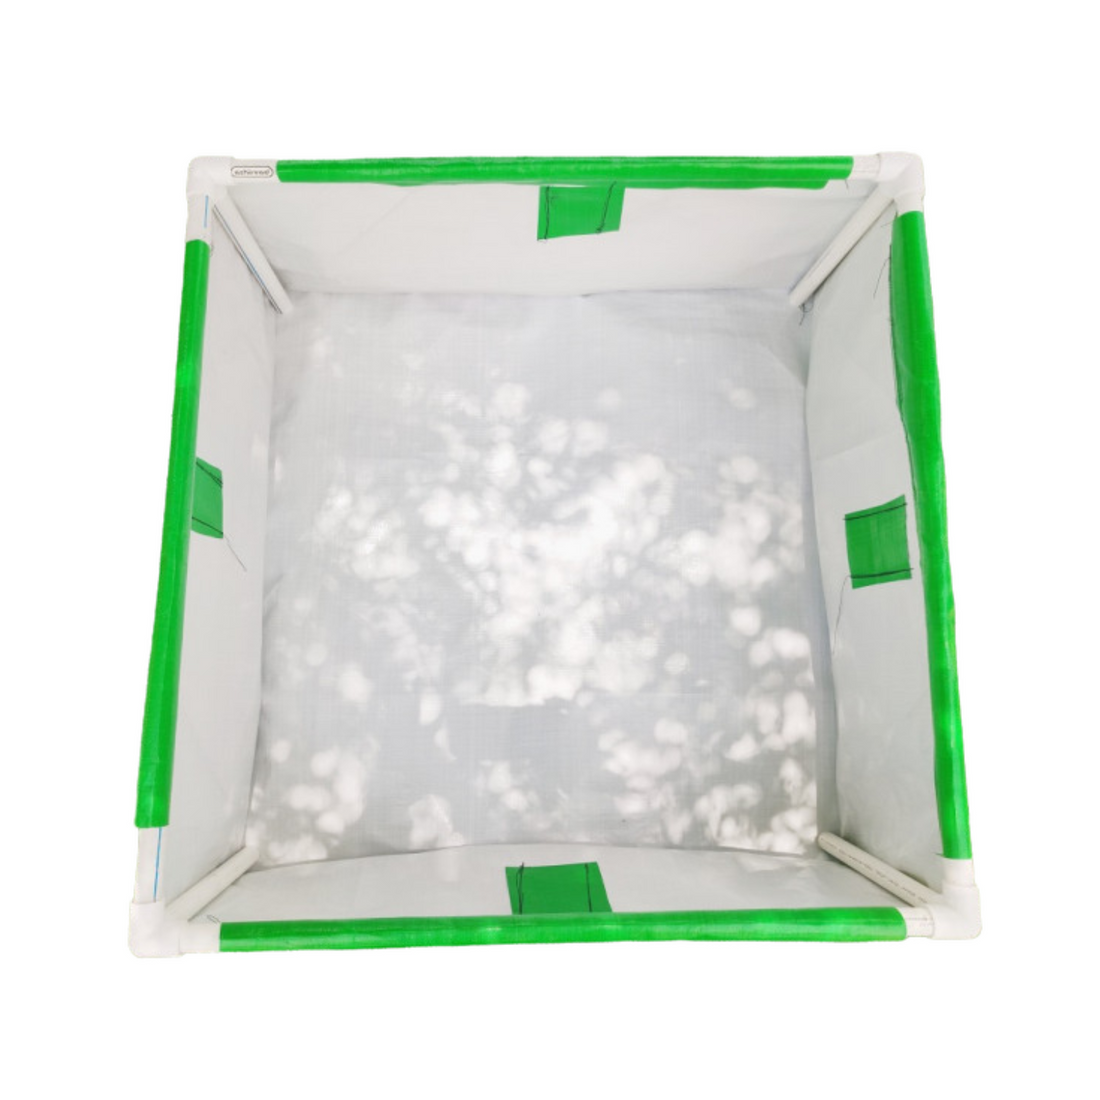 36x36x12 Inches (3x3x1 Ft) - 400 GSM HDPE Rectangular Grow Bag With Supporting PVC Pipes